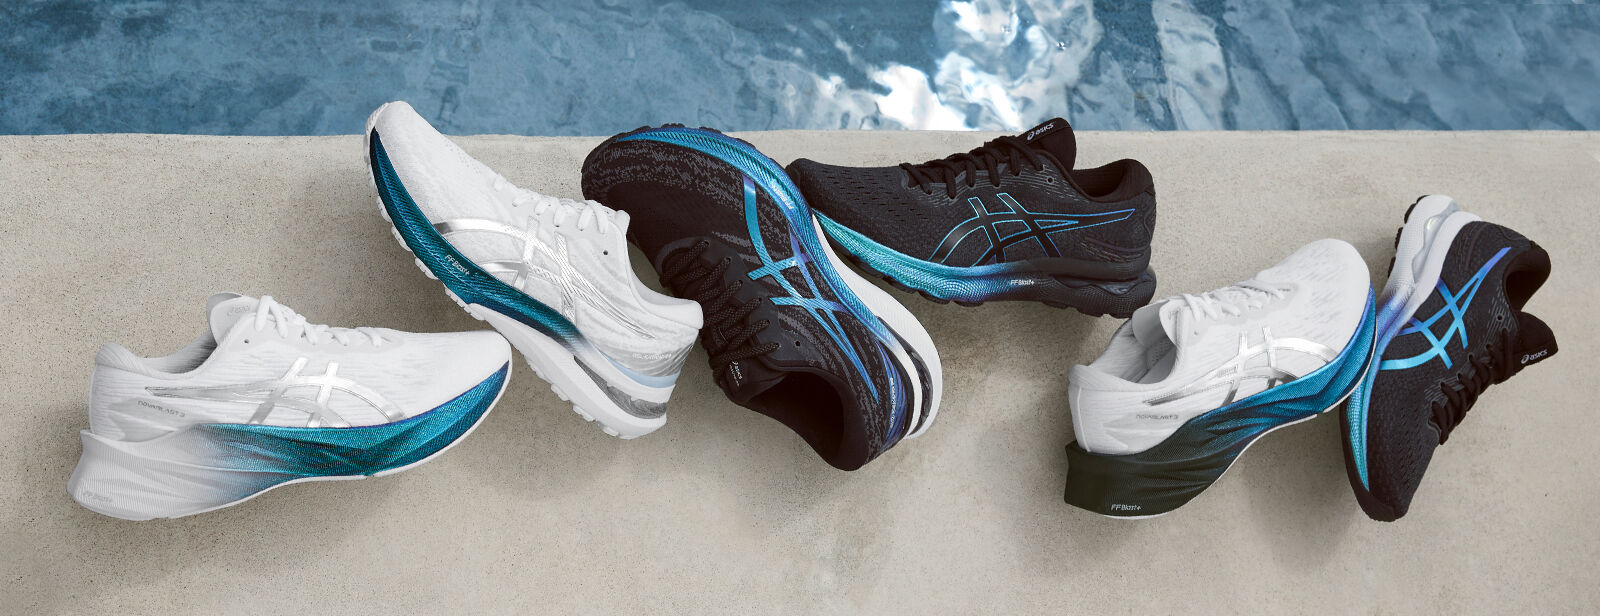 Should I Have More Than One Pair of Running Shoes? | ASICS